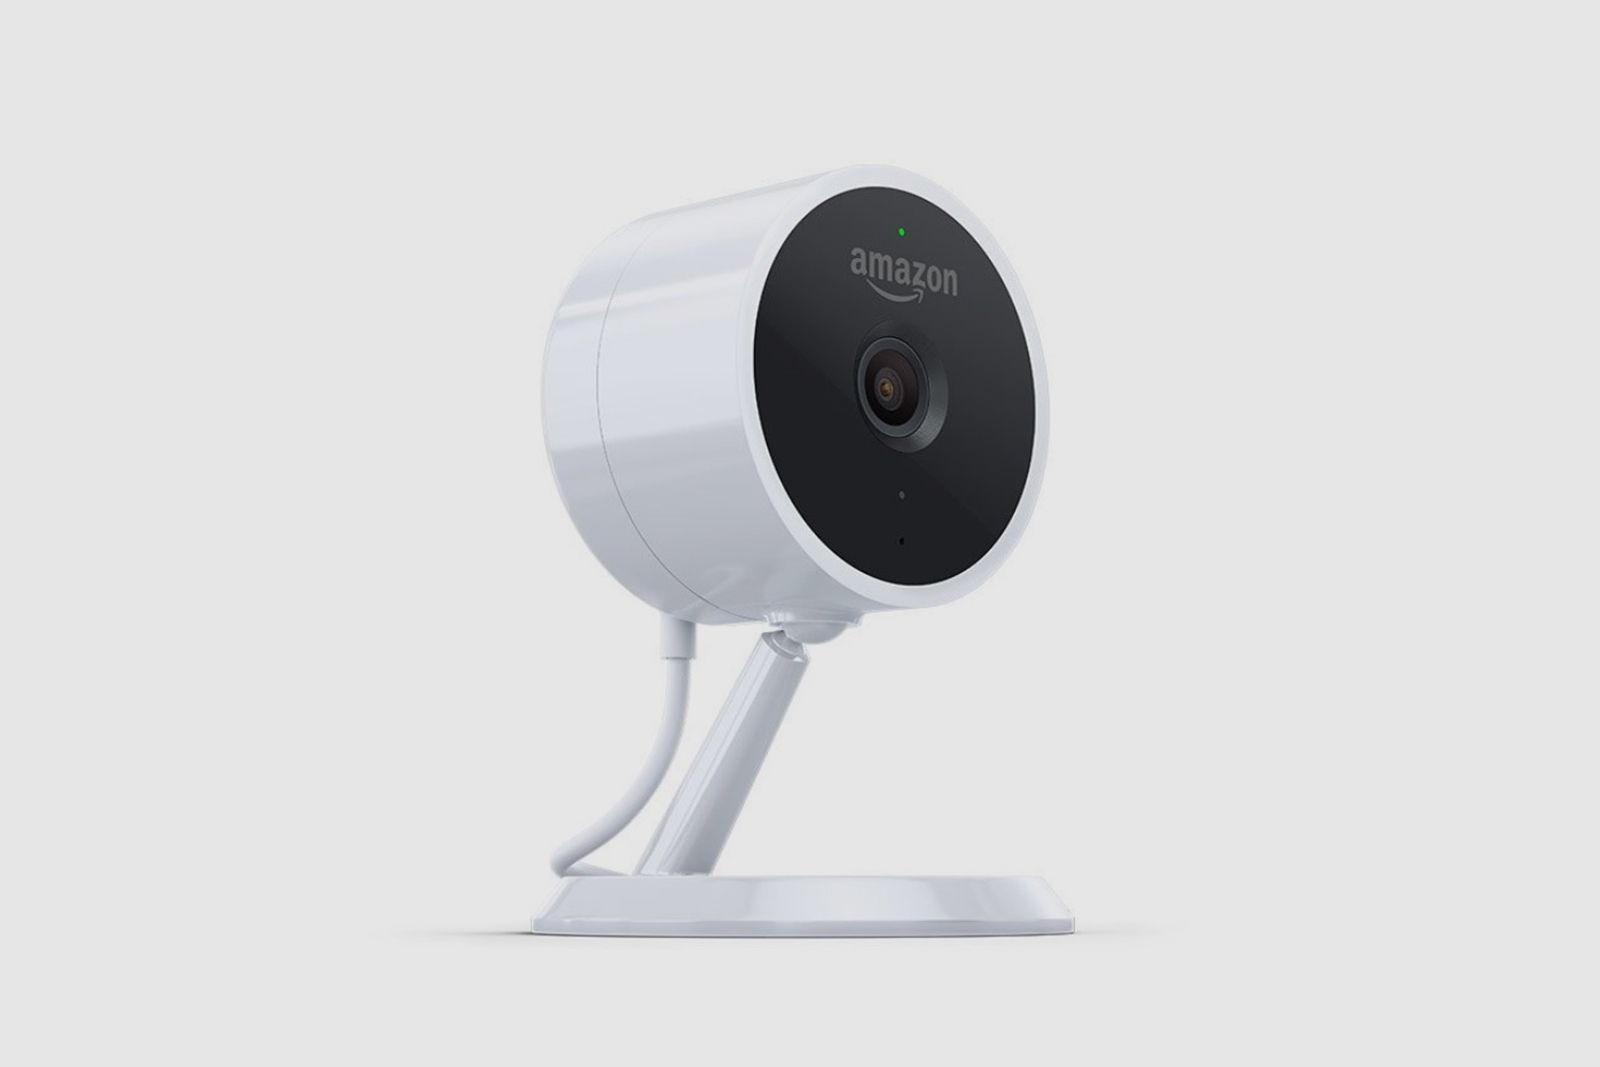 Amazons new Cloud Cam indoor security camera can monitor couriers and more image 1